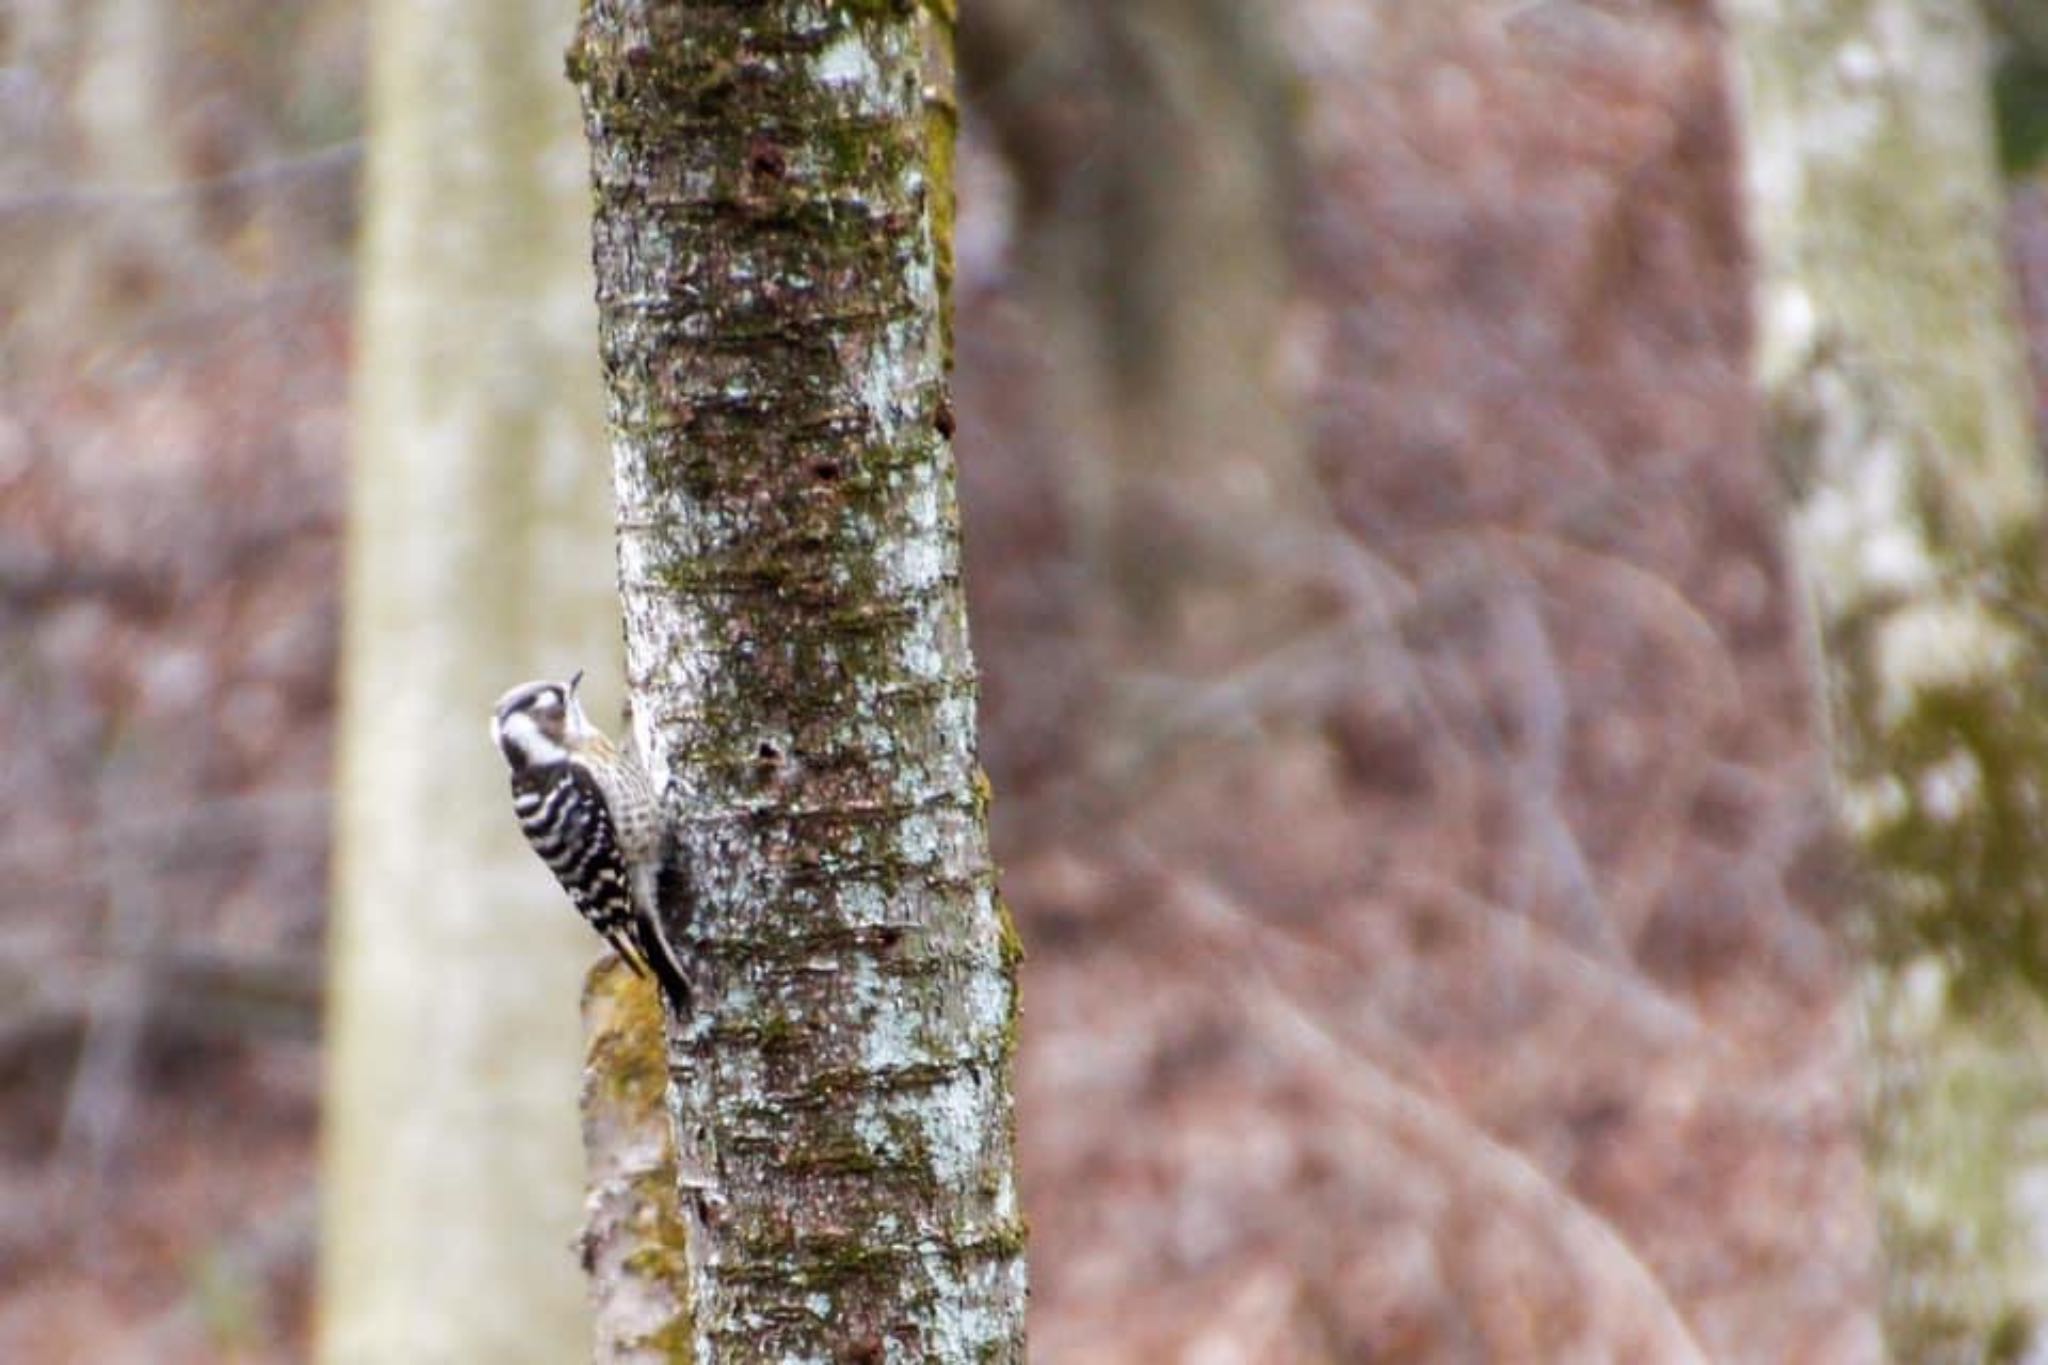 Photo of Japanese Pygmy Woodpecker at Saitama Prefecture Forest Park by naturedrop